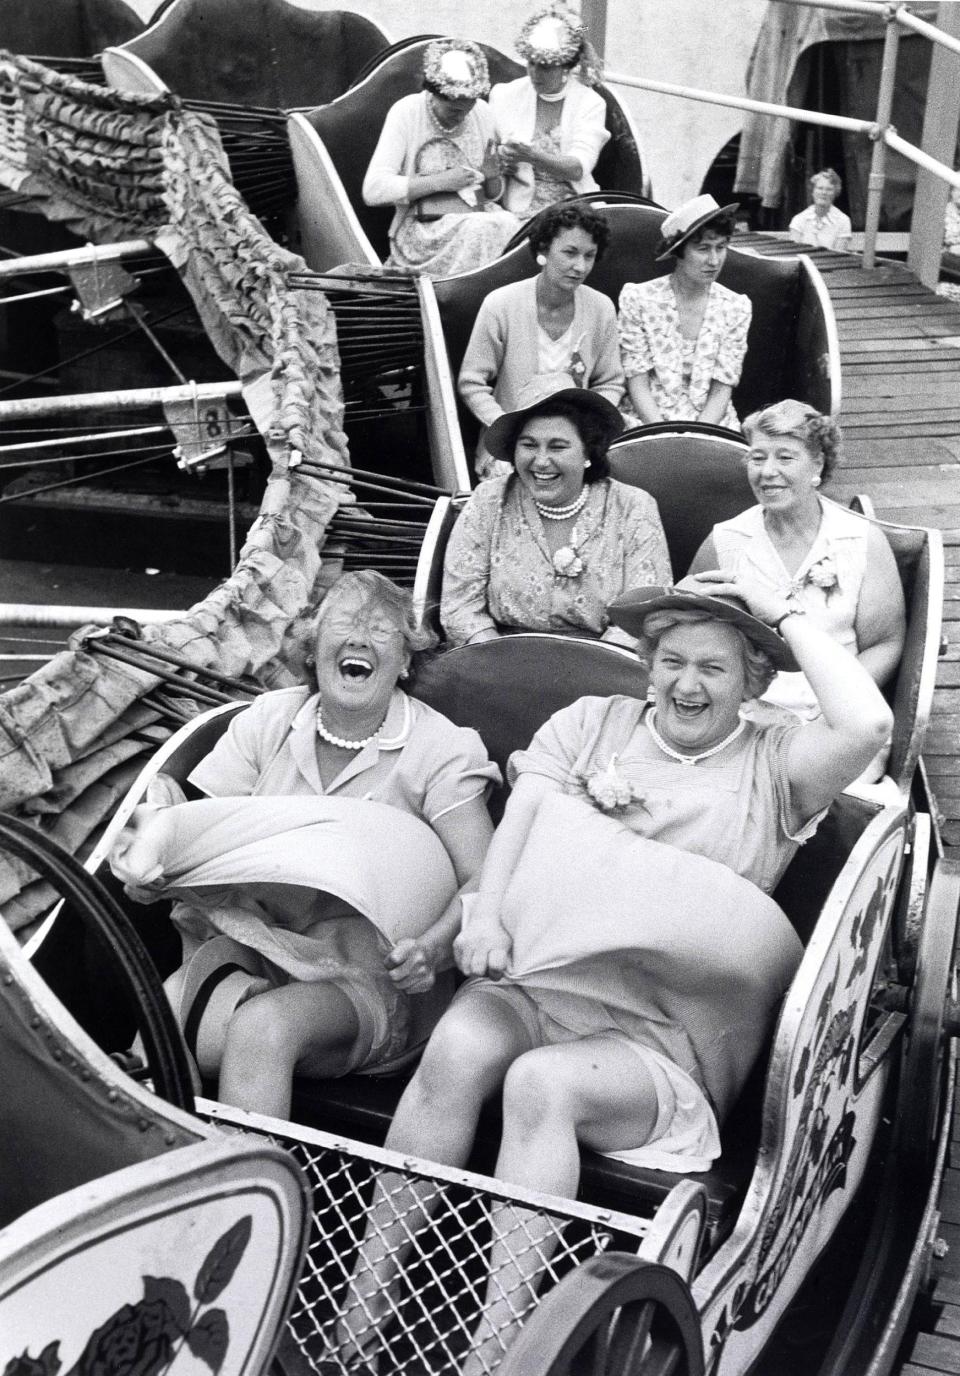 Women from Clapham enjoying a caterpillar ride on a pub outing in 1956 - Grace Robertson /Bonhams/PA Wire